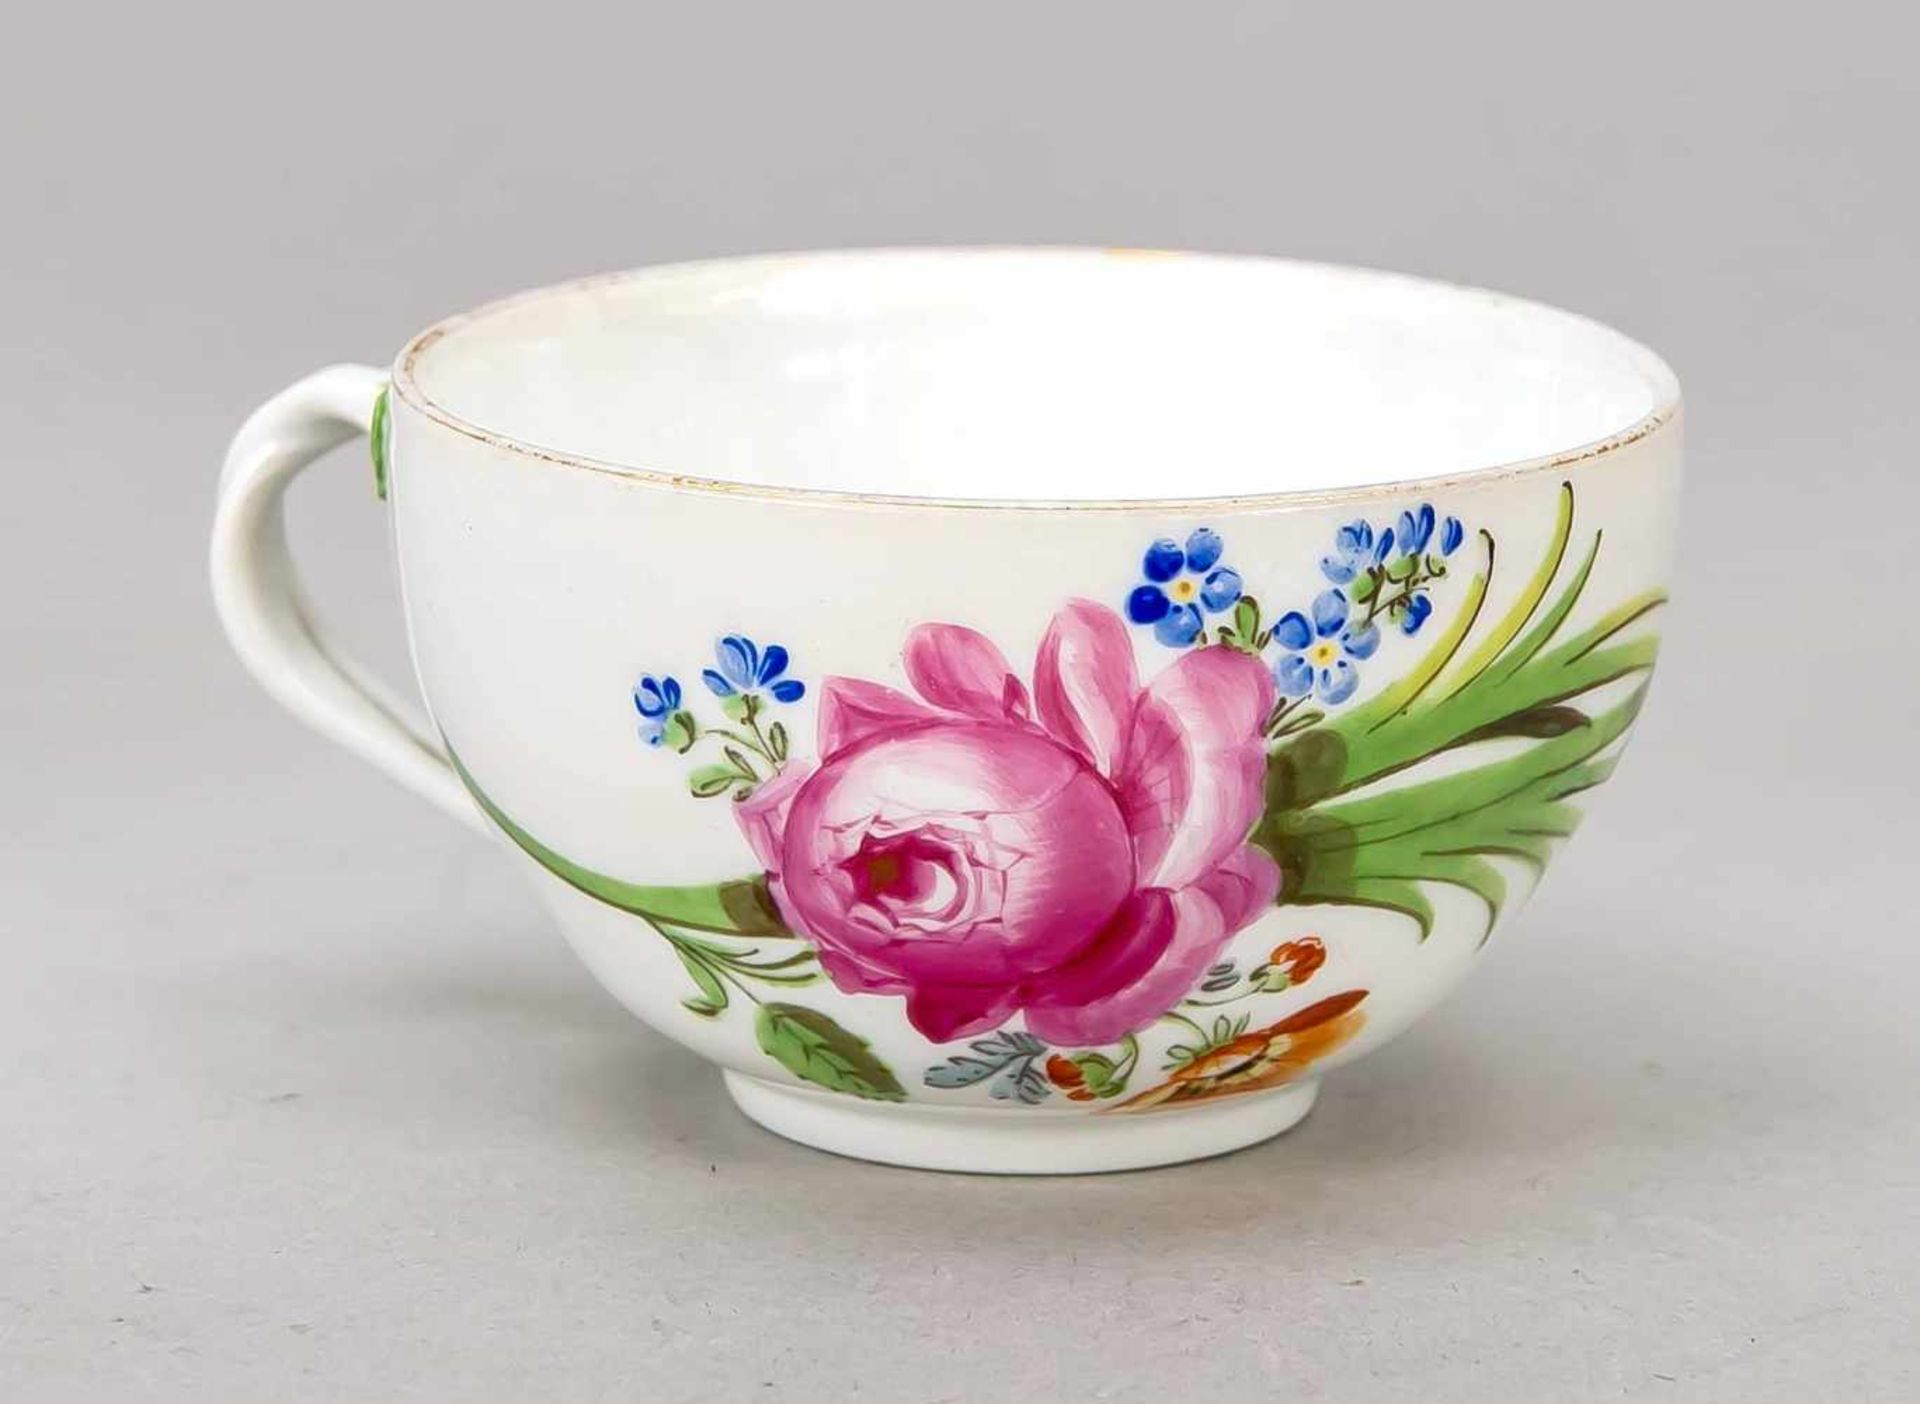 Marcolini cup, Meissen, mark 1774-1817, 1st quality, handle in the form of sinuoustendrils,